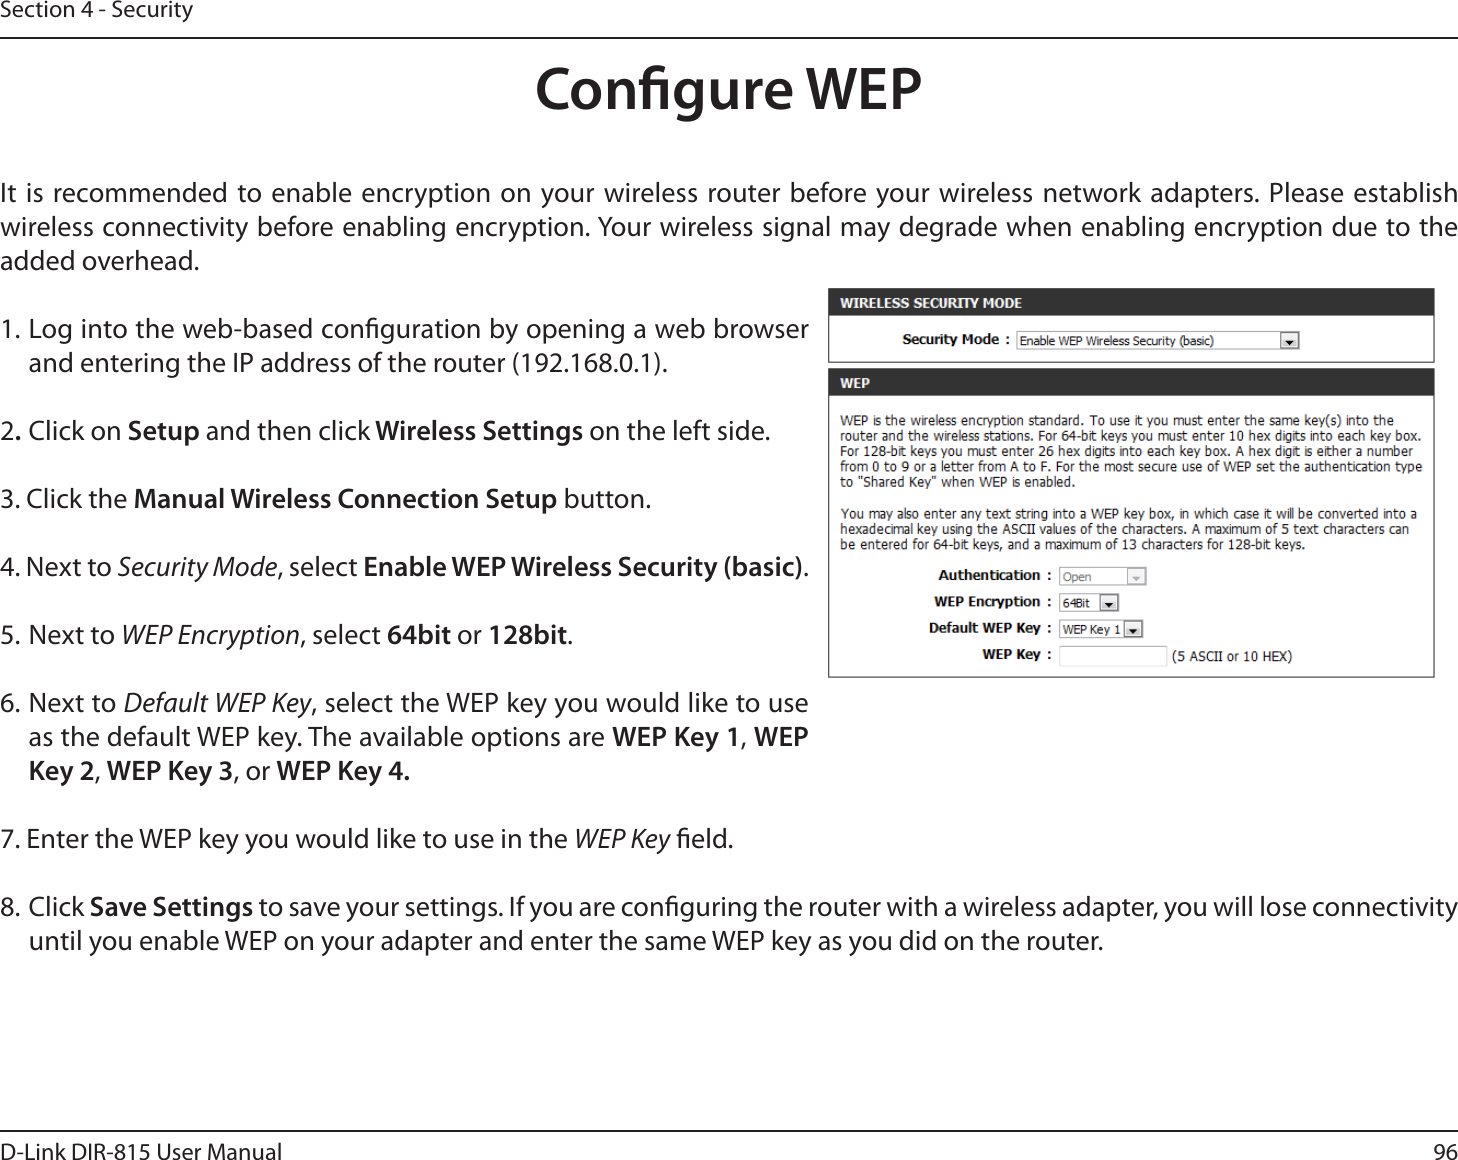 96D-Link DIR-815 User ManualSection 4 - SecurityCongure WEPIt is recommended to enable encryption on your wireless router before your wireless network adapters. Please establish XJSFMFTTDPOOFDUJWJUZCFGPSFFOBCMJOHFODSZQUJPO:PVSXJSFMFTTTJHOBMNBZEFHSBEFXIFOFOBCMJOHFODSZQUJPOEVFUPUIFadded overhead.1. Log into the web-based conguration by opening a web browser and entering the IP address of the router (192.168.0.1).  2Click on Setup and then click Wireless Settings on the left side.3. Click the Manual Wireless Connection Setup button. 4. Next to Security Mode, select Enable WEP Wireless Security (basic).5. Next to WEP Encryption, select 64bit orCJU.6. Next to Default WEP Key, select the WEP key you would like to use as the default WEP key. The available options are WEP Key 1, WEP ,FZ, WEP Key 3, or 8&amp;1,FZ7. Enter the WEP key you would like to use in the WEP Key eld.8. Click Save Settings to save your settings. If you are conguring the router with a wireless adapter, you will lose connectivity until you enable WEP on your adapter and enter the same WEP key as you did on the router.